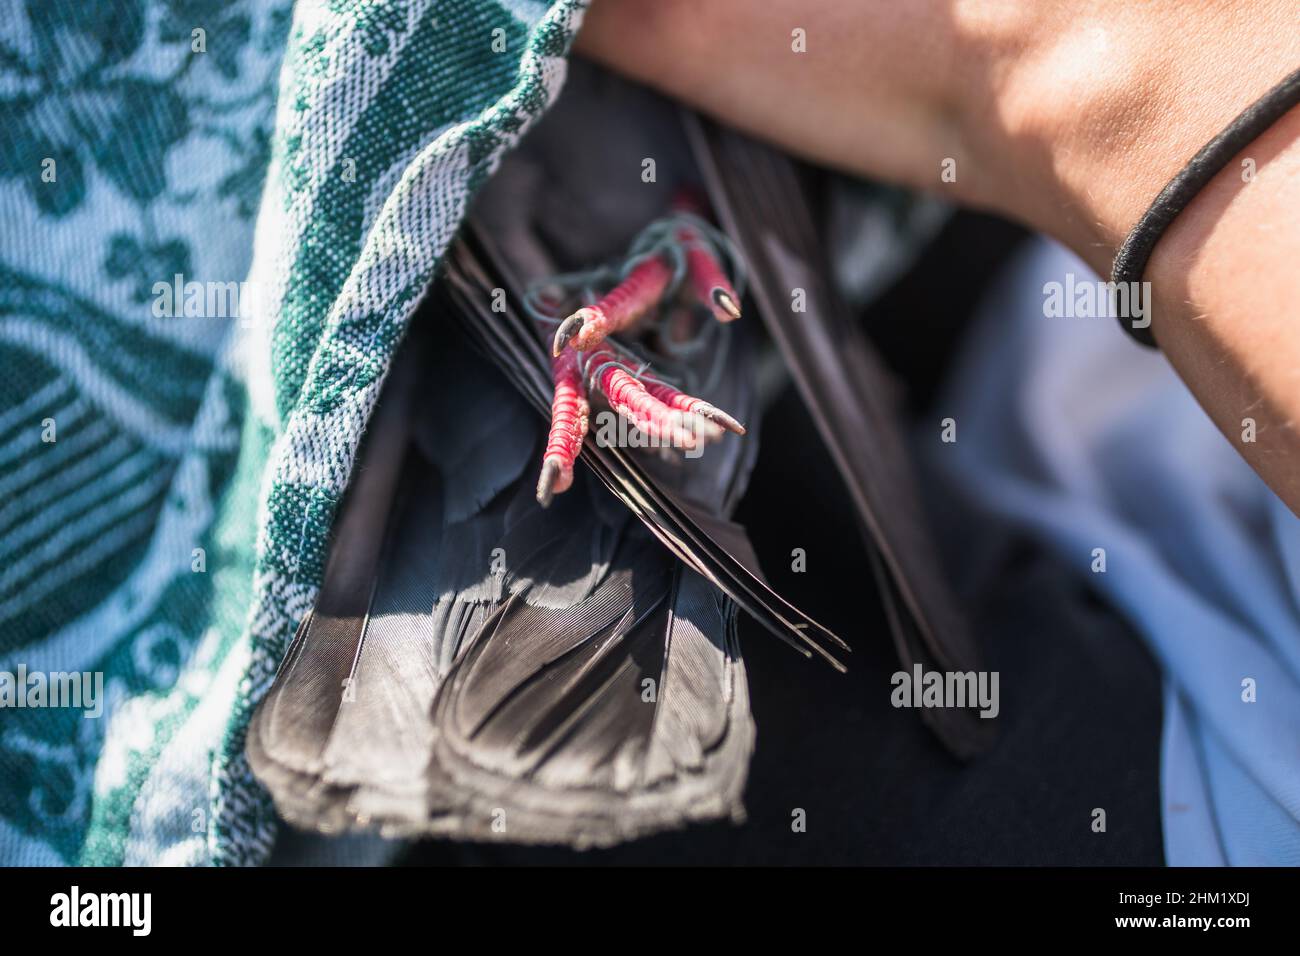 Rescuing a pigeon with a tangled string in his claw. Stock Photo